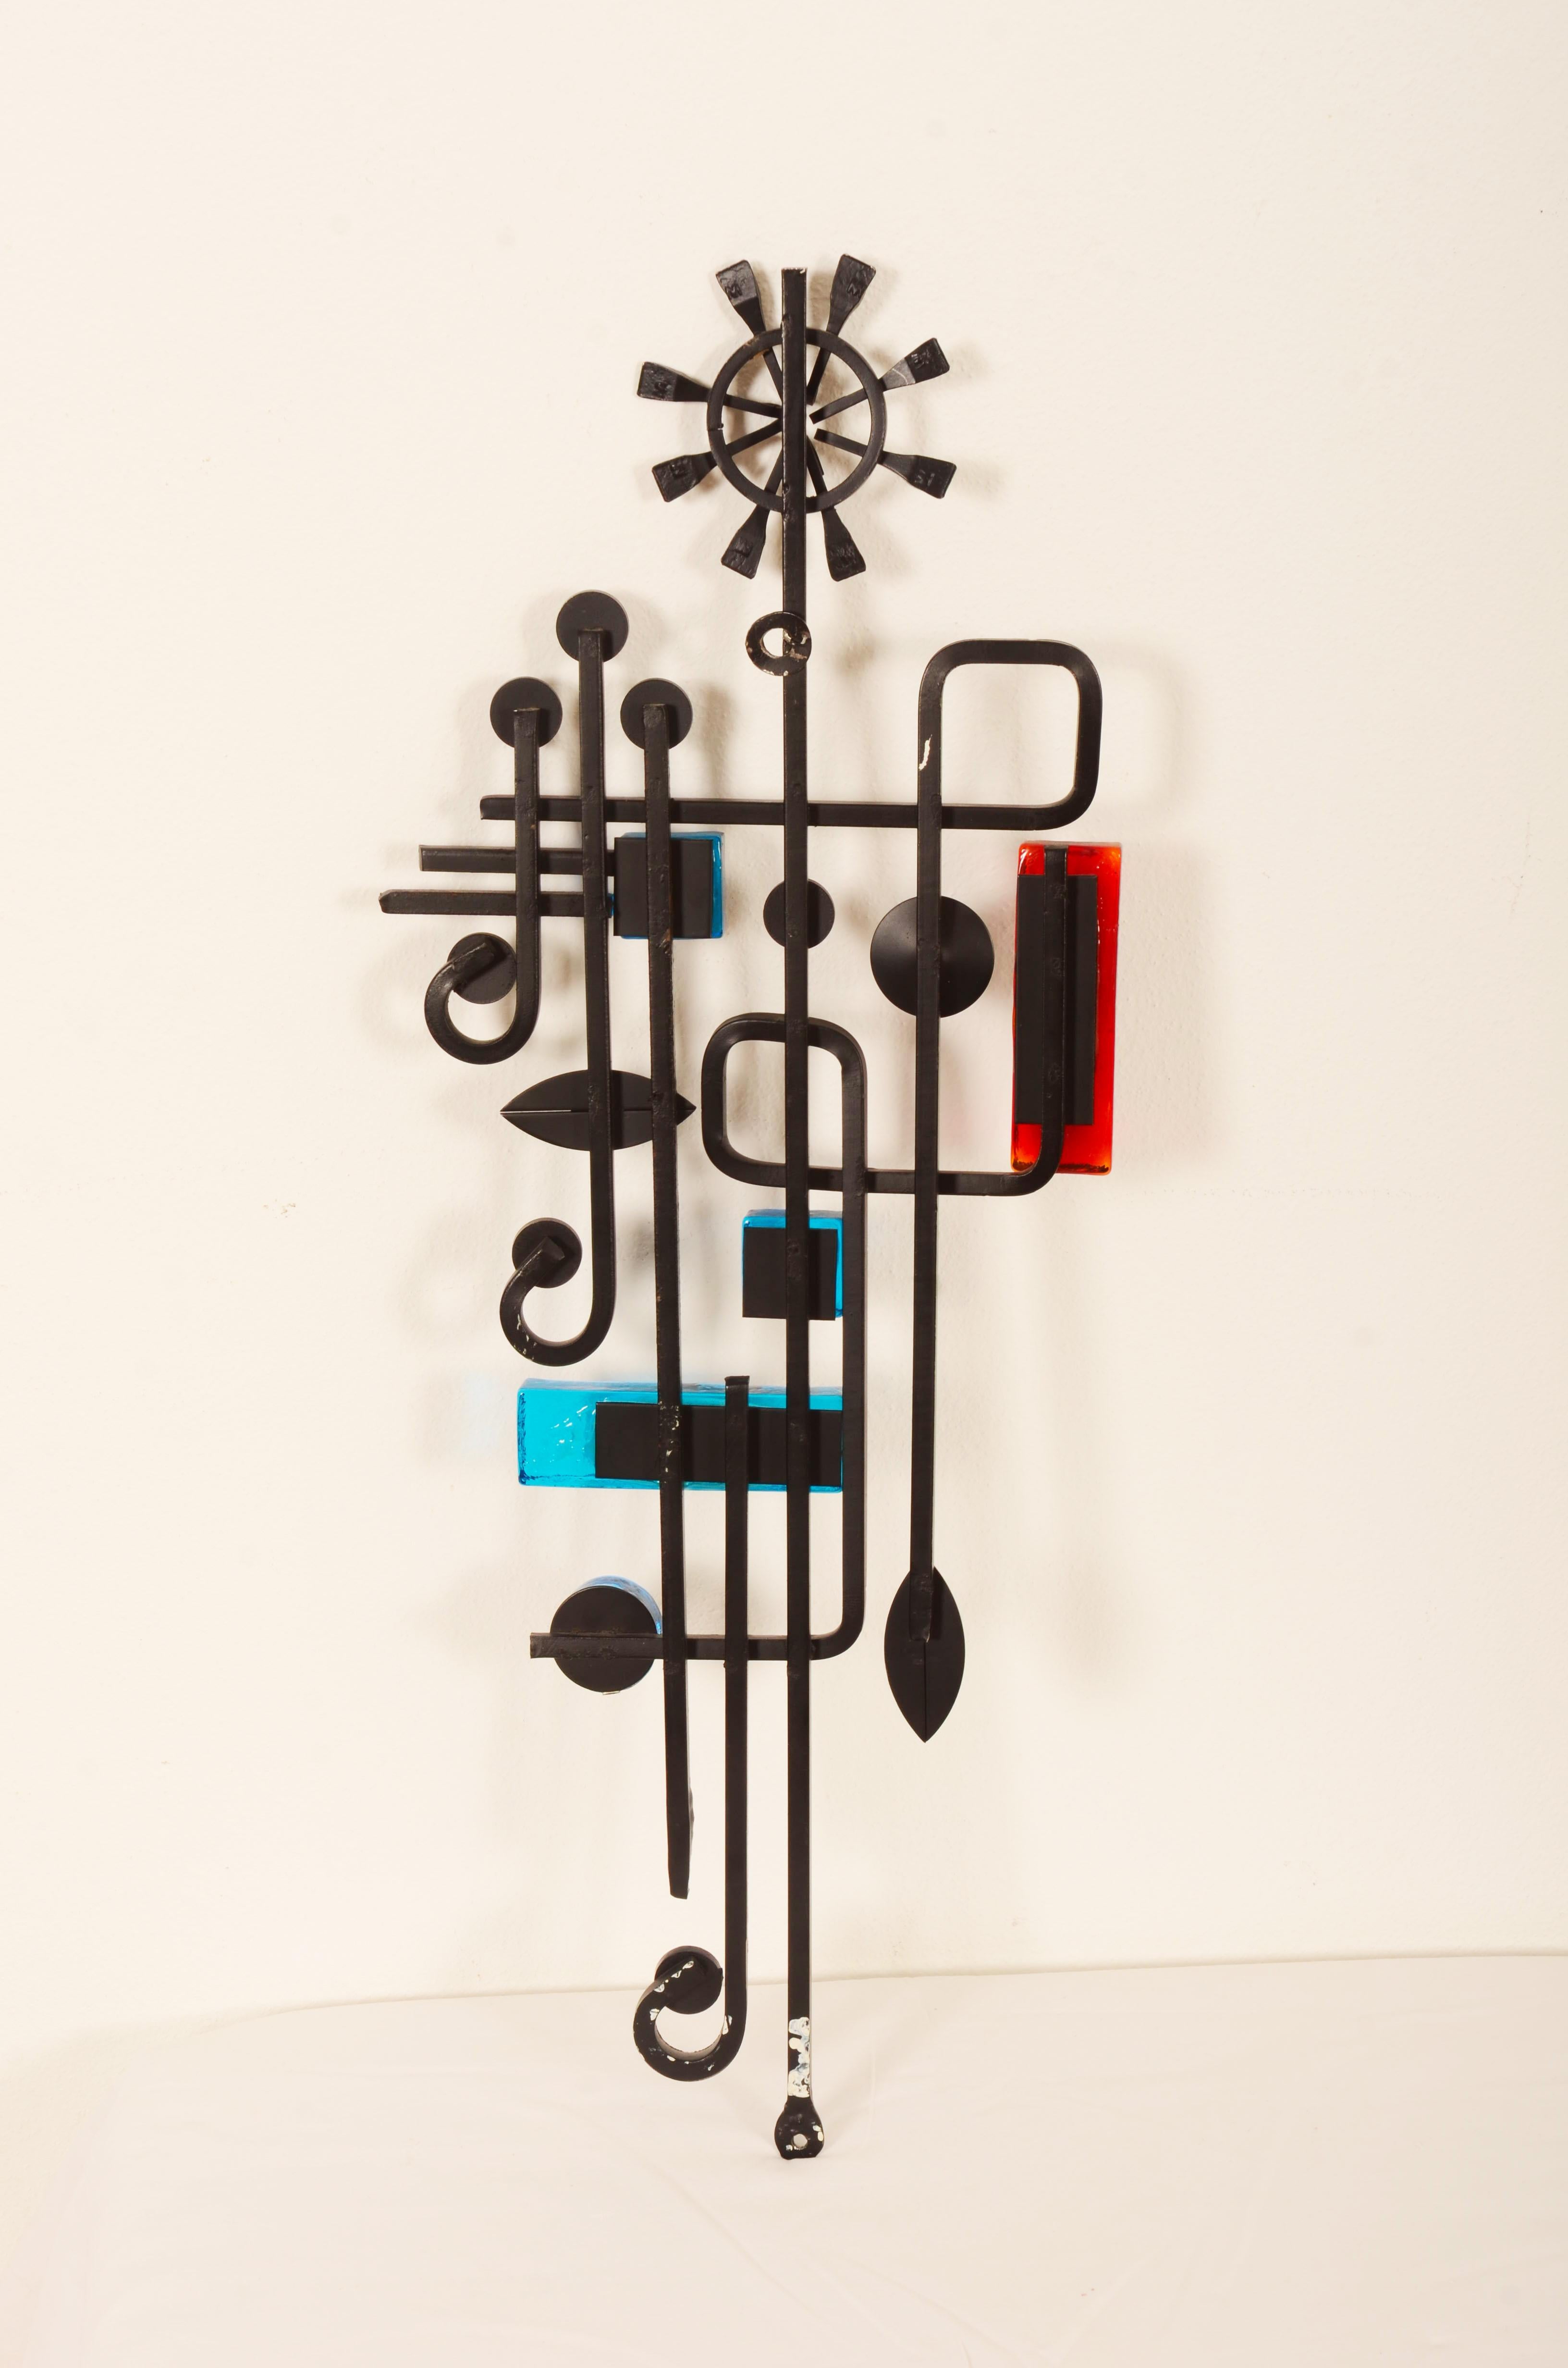 Mid-20th Century Wall Sculpture Art Work by Svend Aage Holm Sorensen from the 1960s For Sale